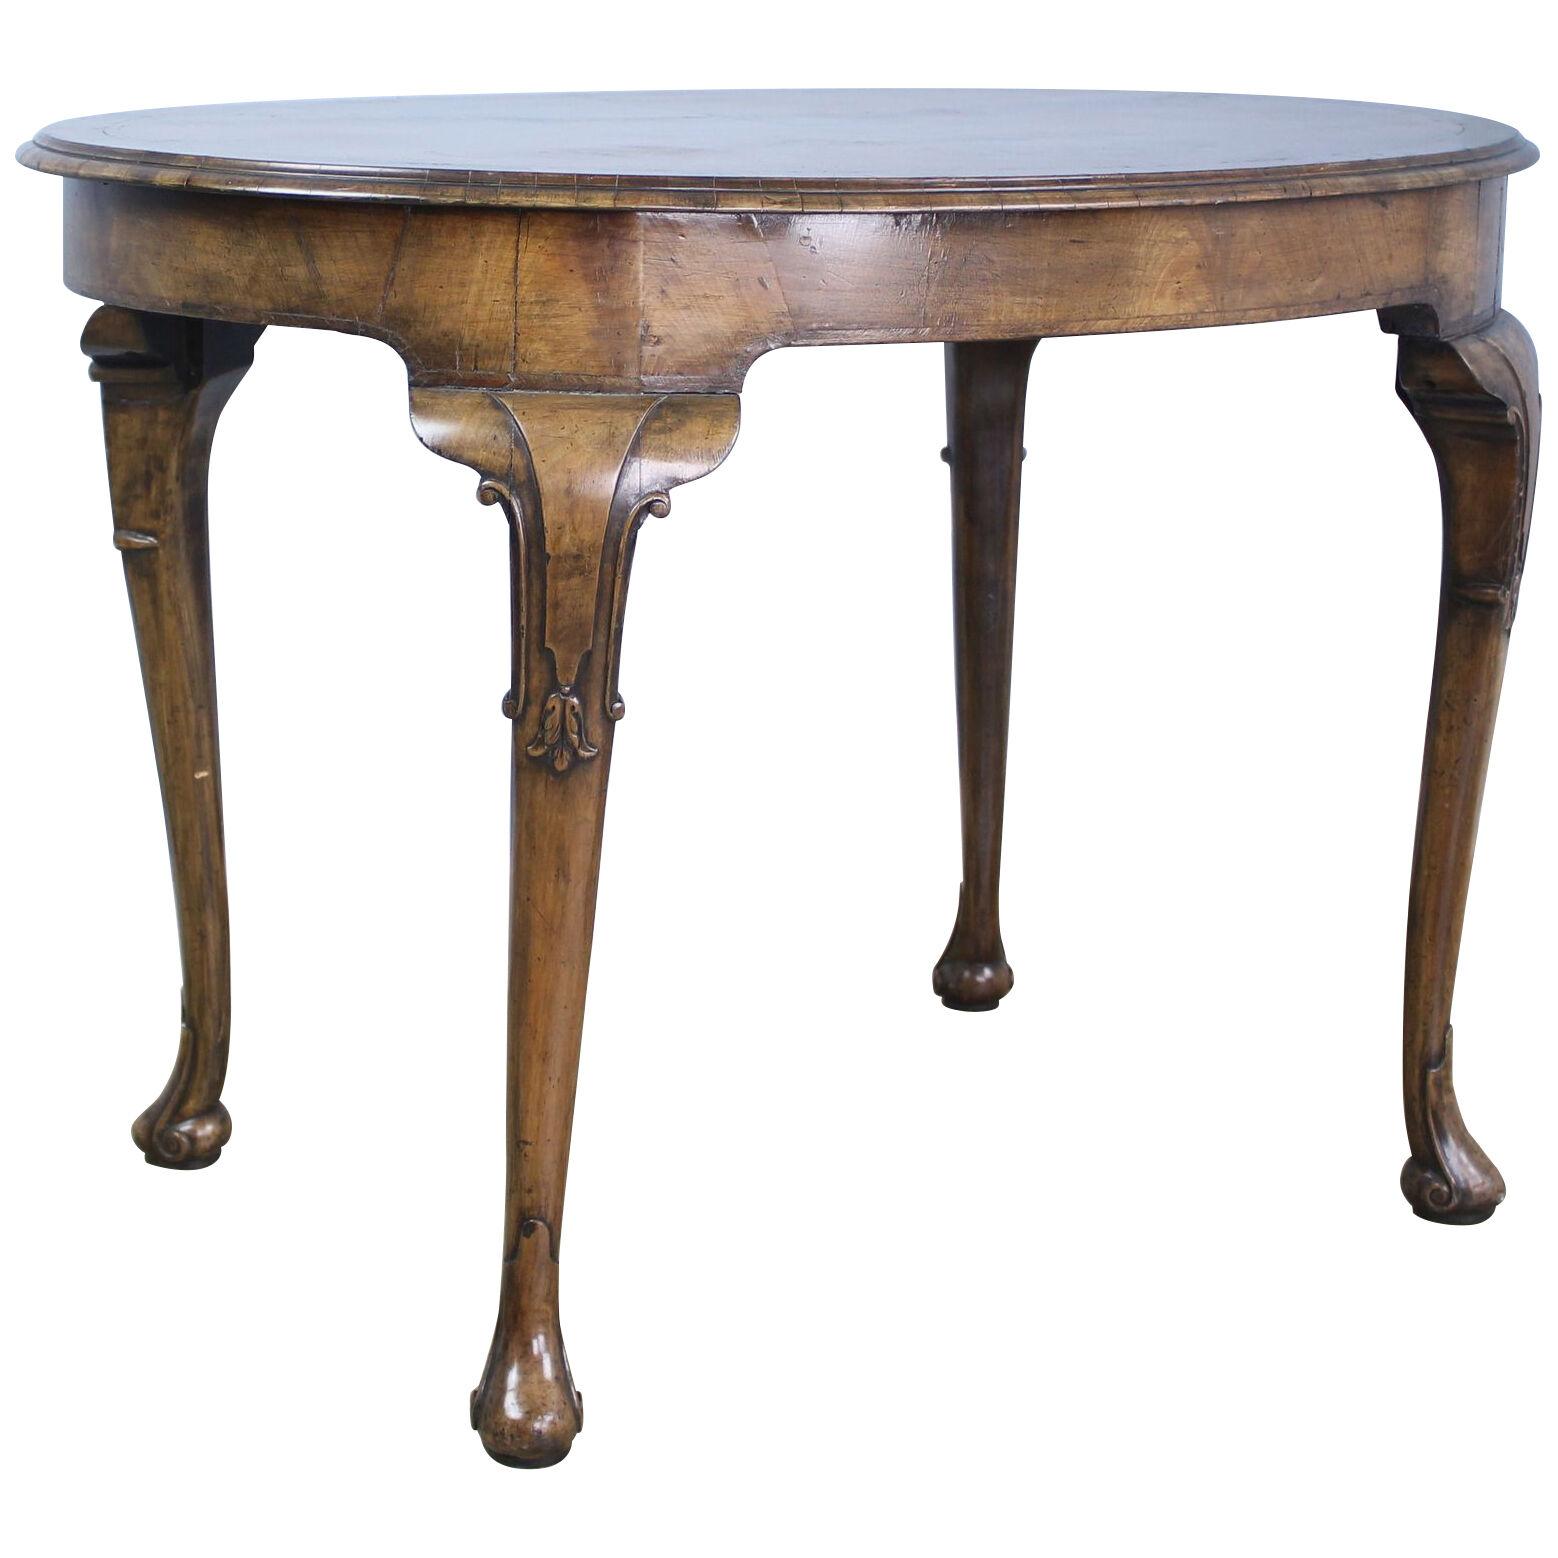 Antique Walnut Center Table, Carved Cabriole Legs